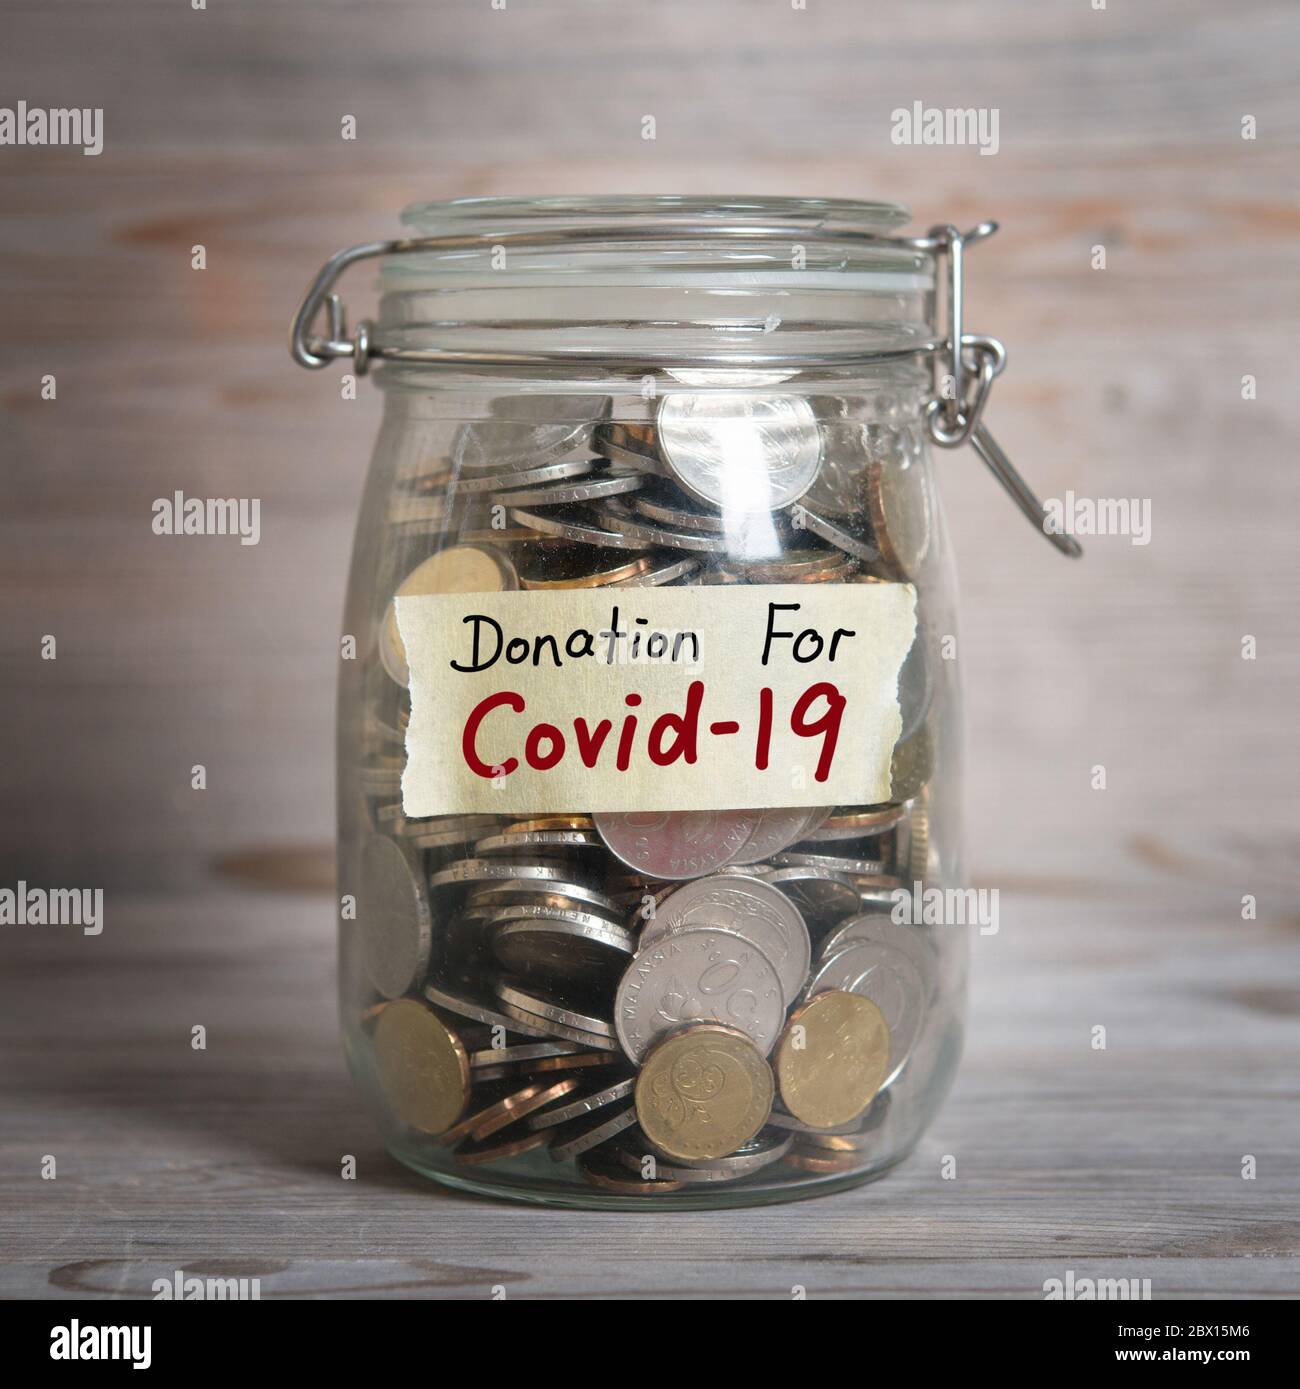 Coins in glass money jar with donation for covid19 label, financial concept. Vintage wooden background with dramatic light. Stock Photo